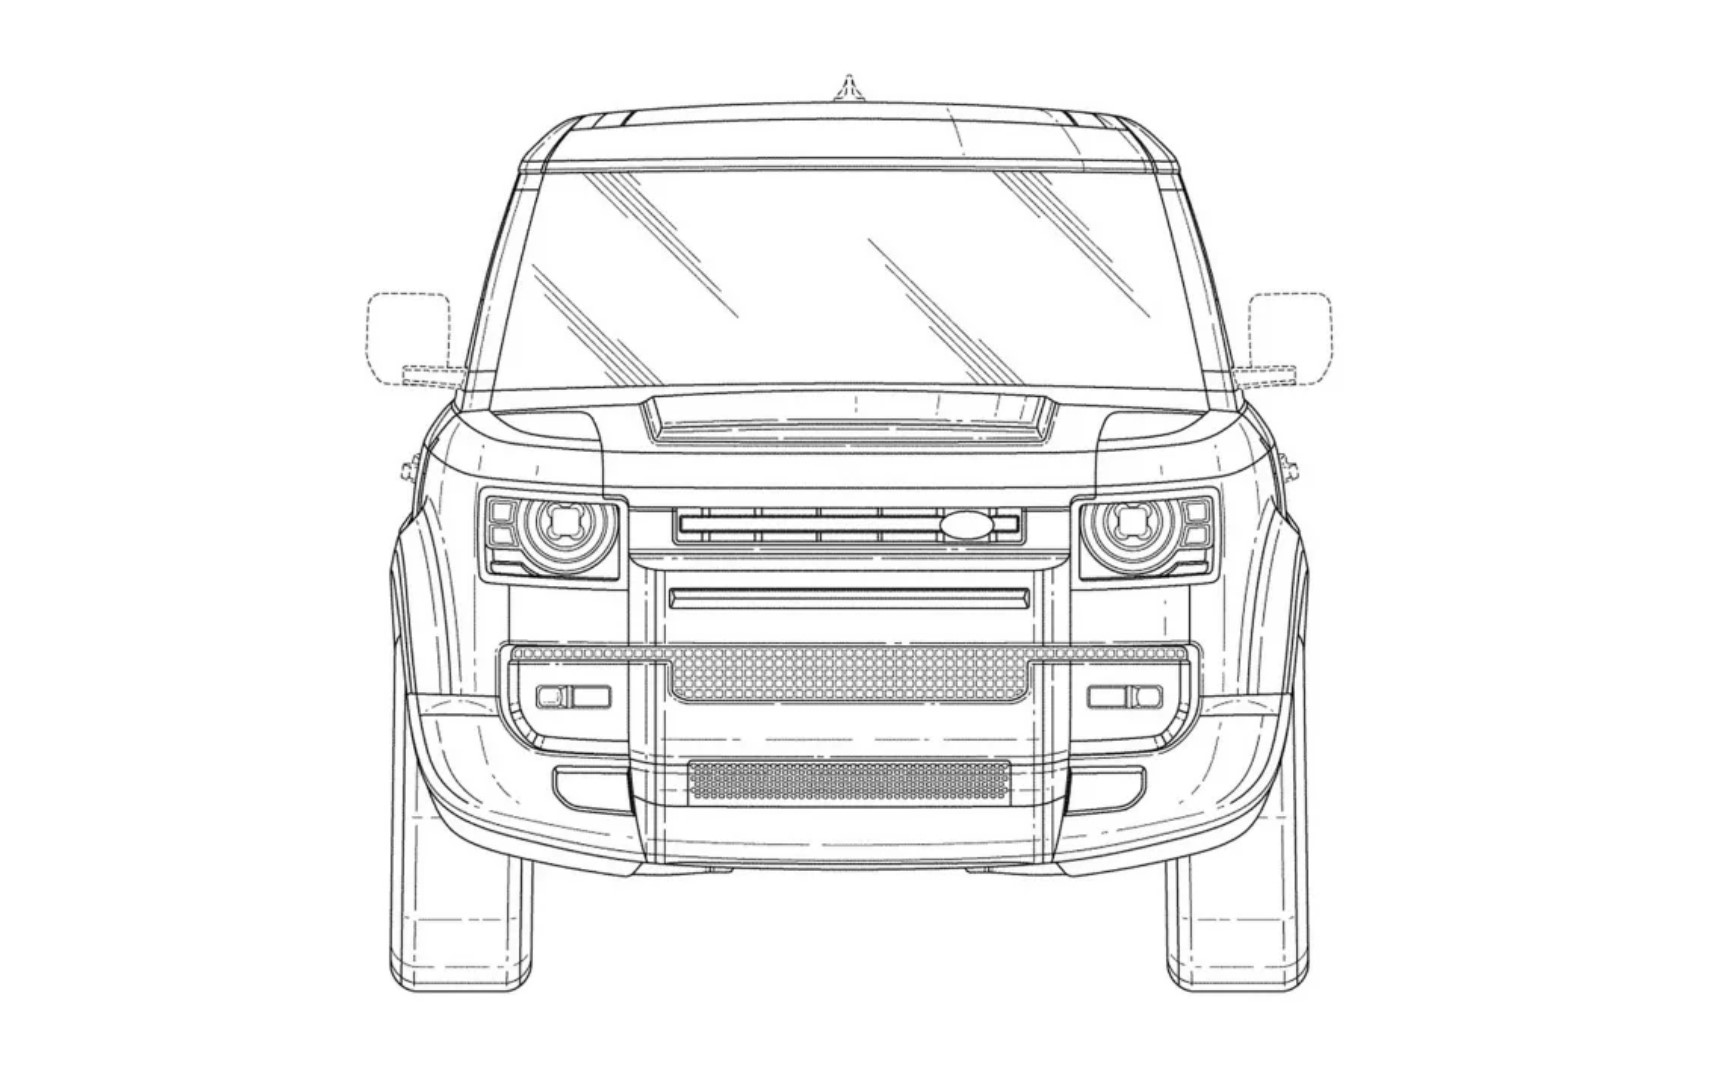 Land Rover Defender 130 patent images 3